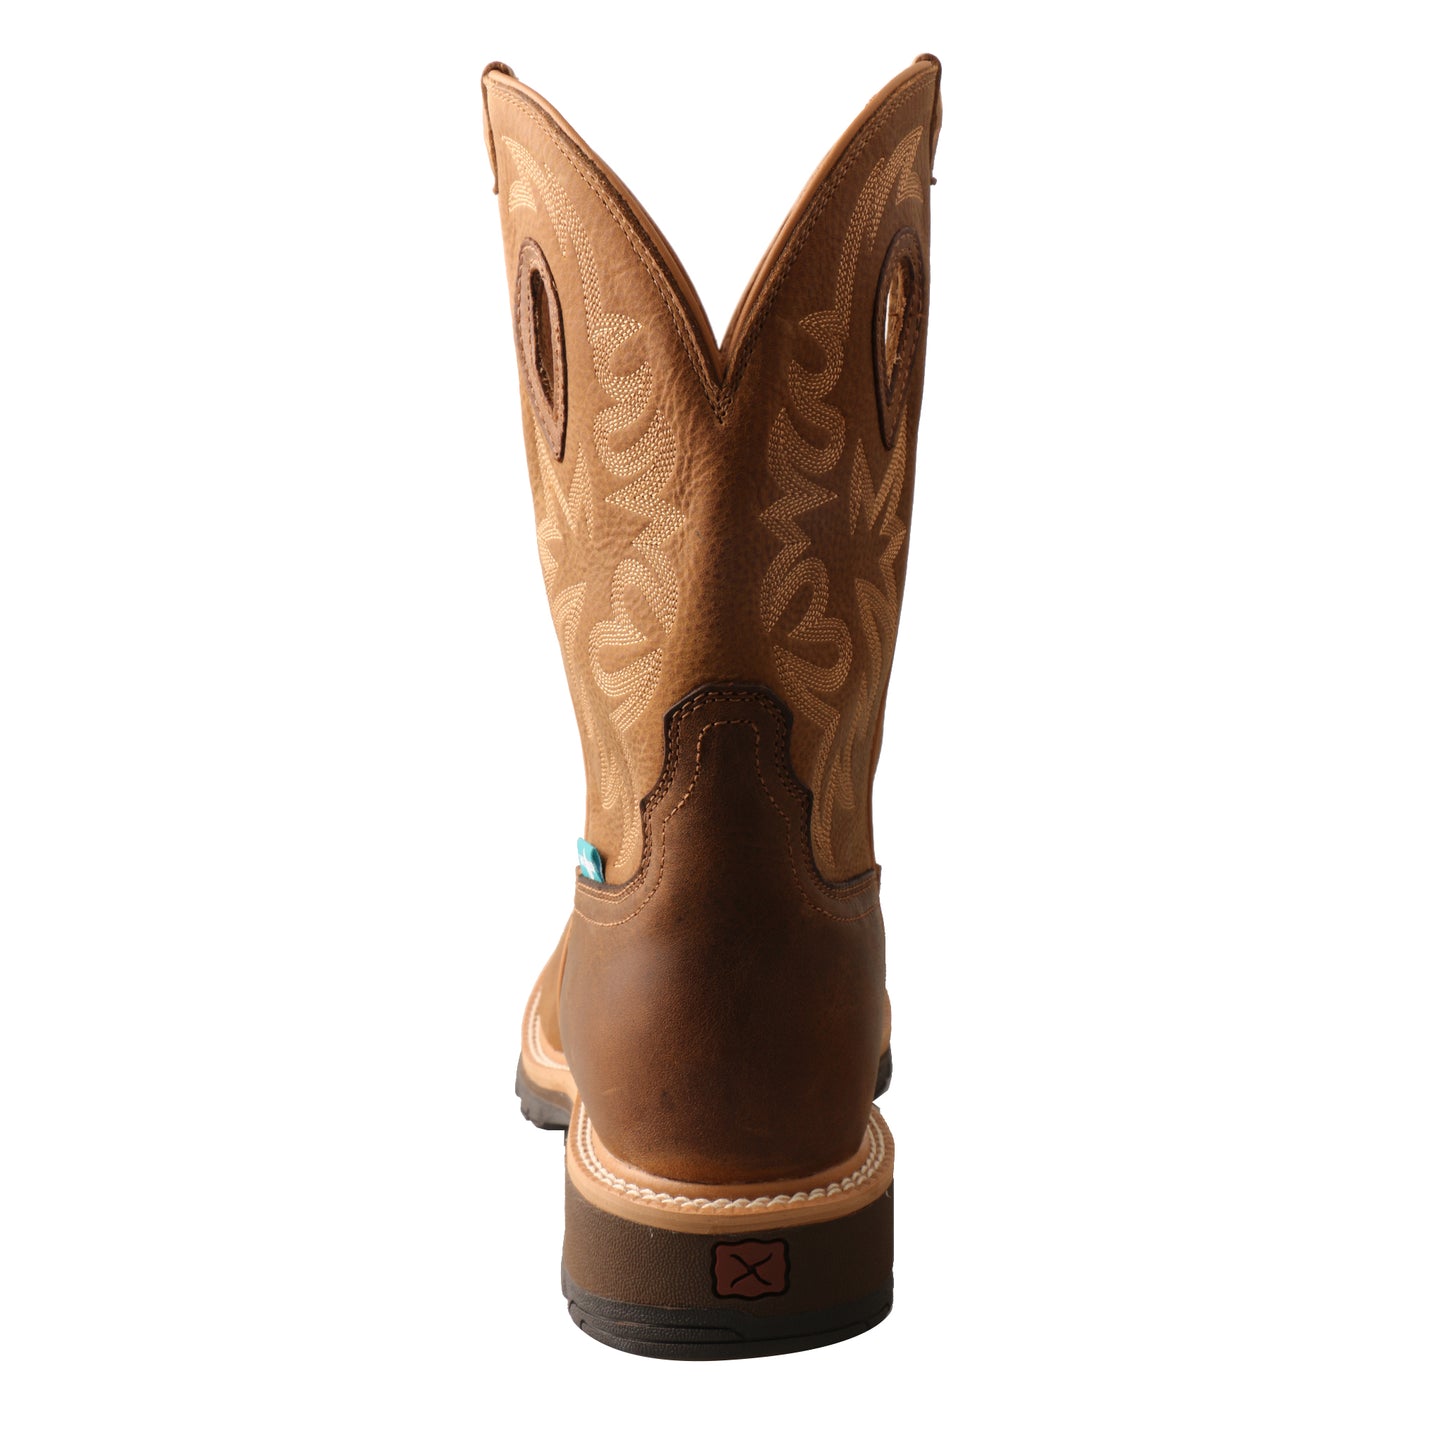 Picture of inside of Men's Twisted X Pull On Soft Toe 11" Western Work Boot MCWW002